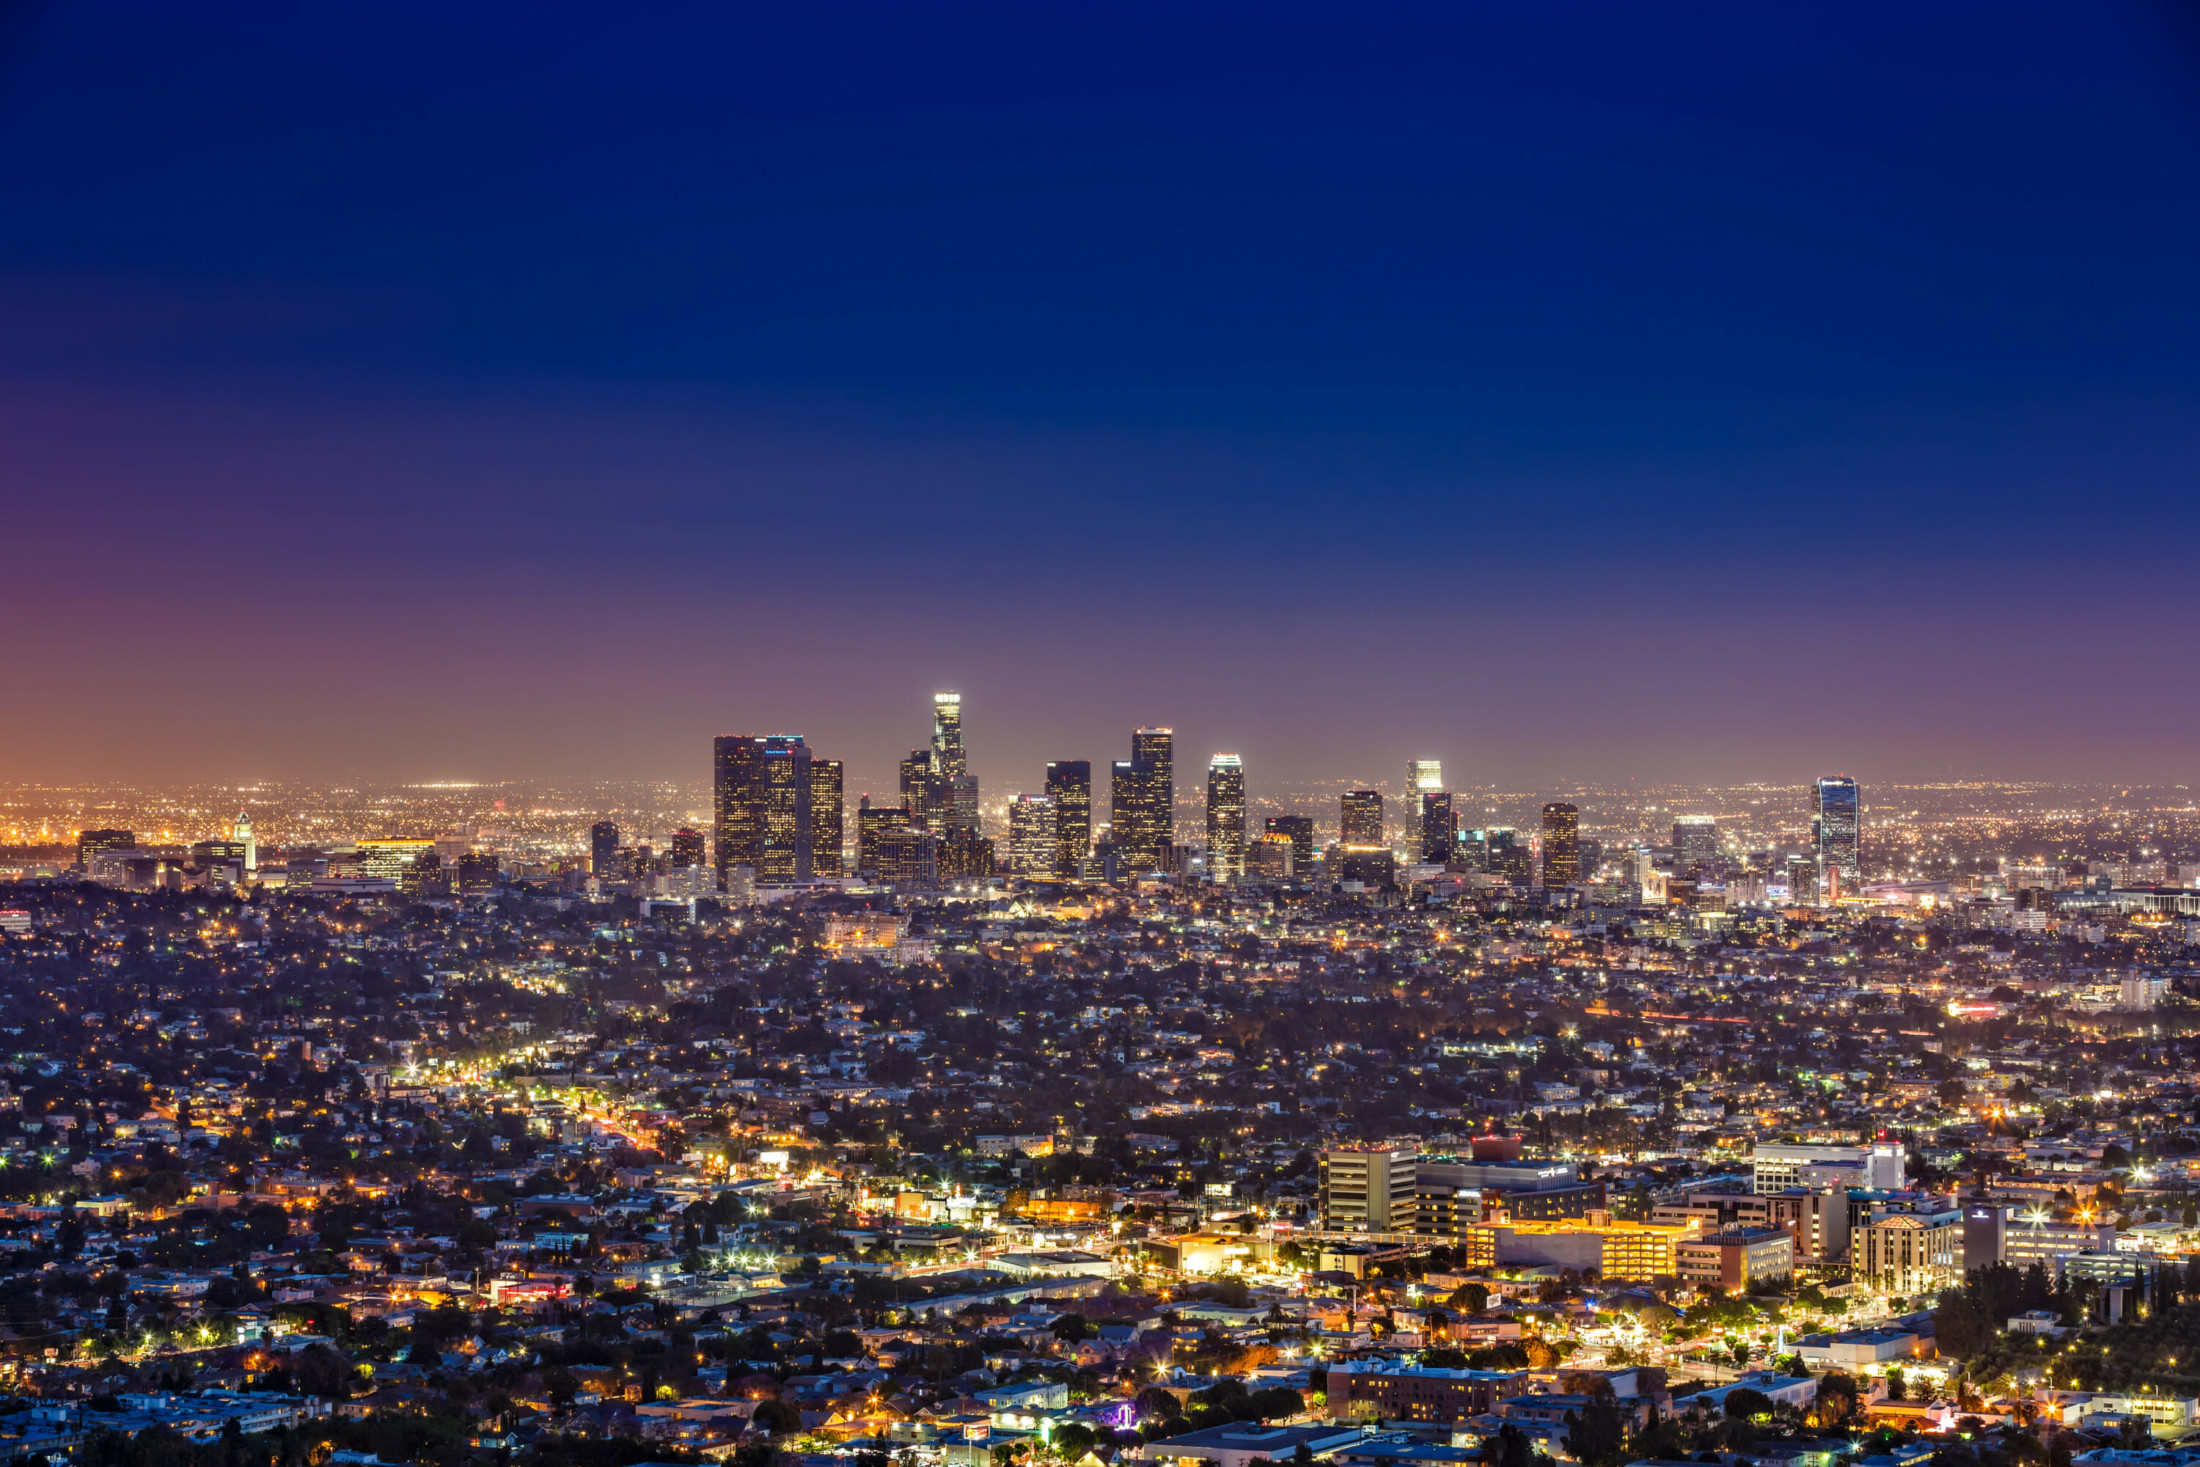 Los Angeles, California | Advice for Property Managers in Primary Markets | Buildium